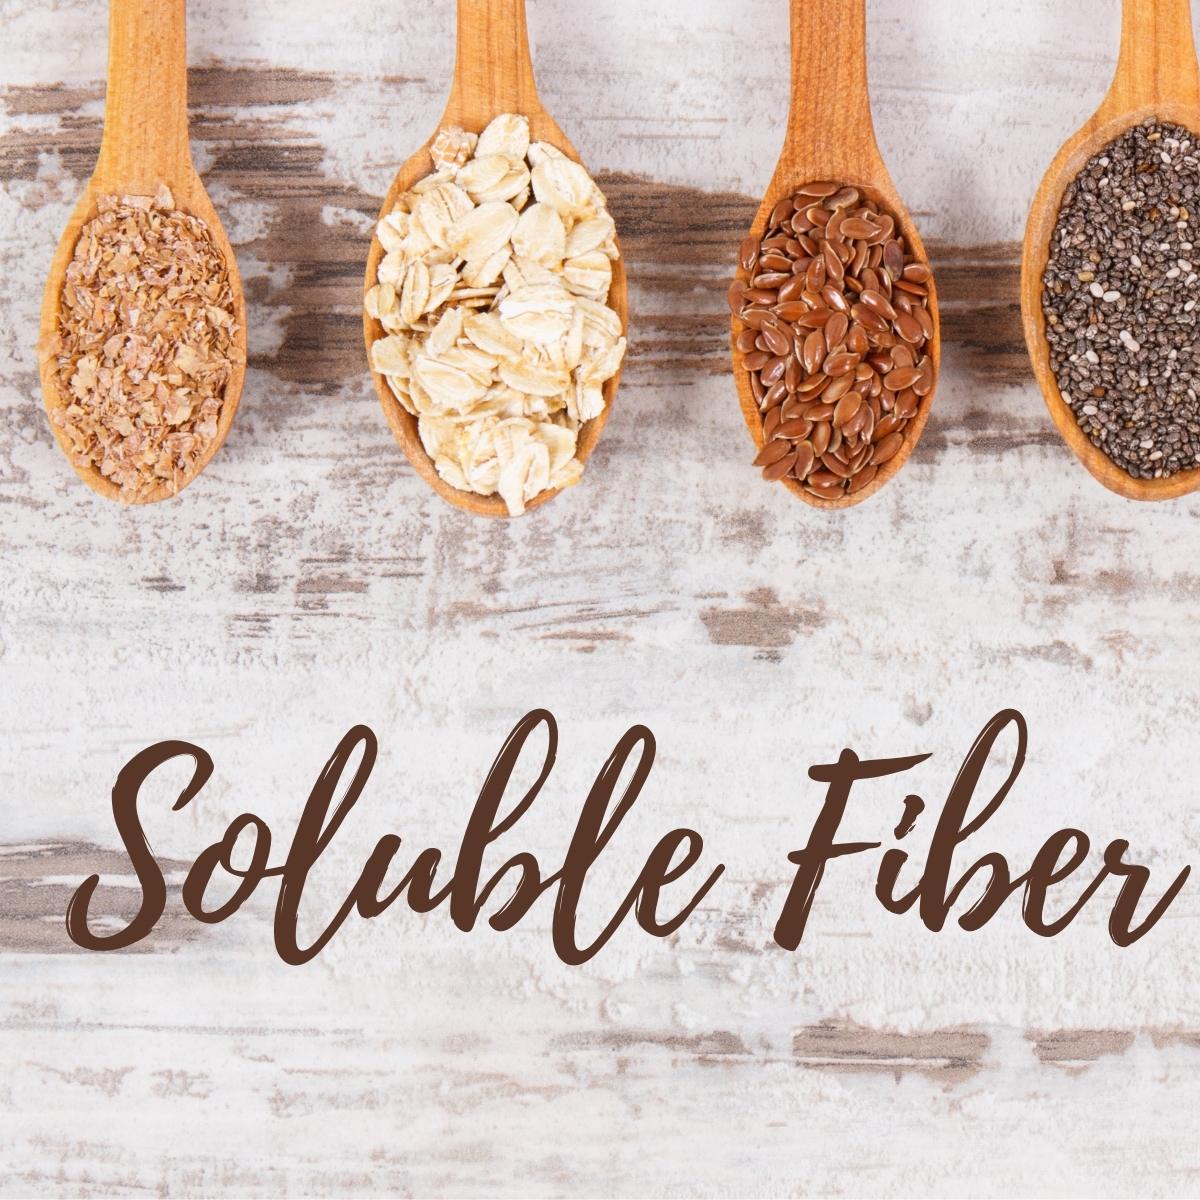 Types of soluble fiber, sources, and health benefits. - Fiber Food Factory